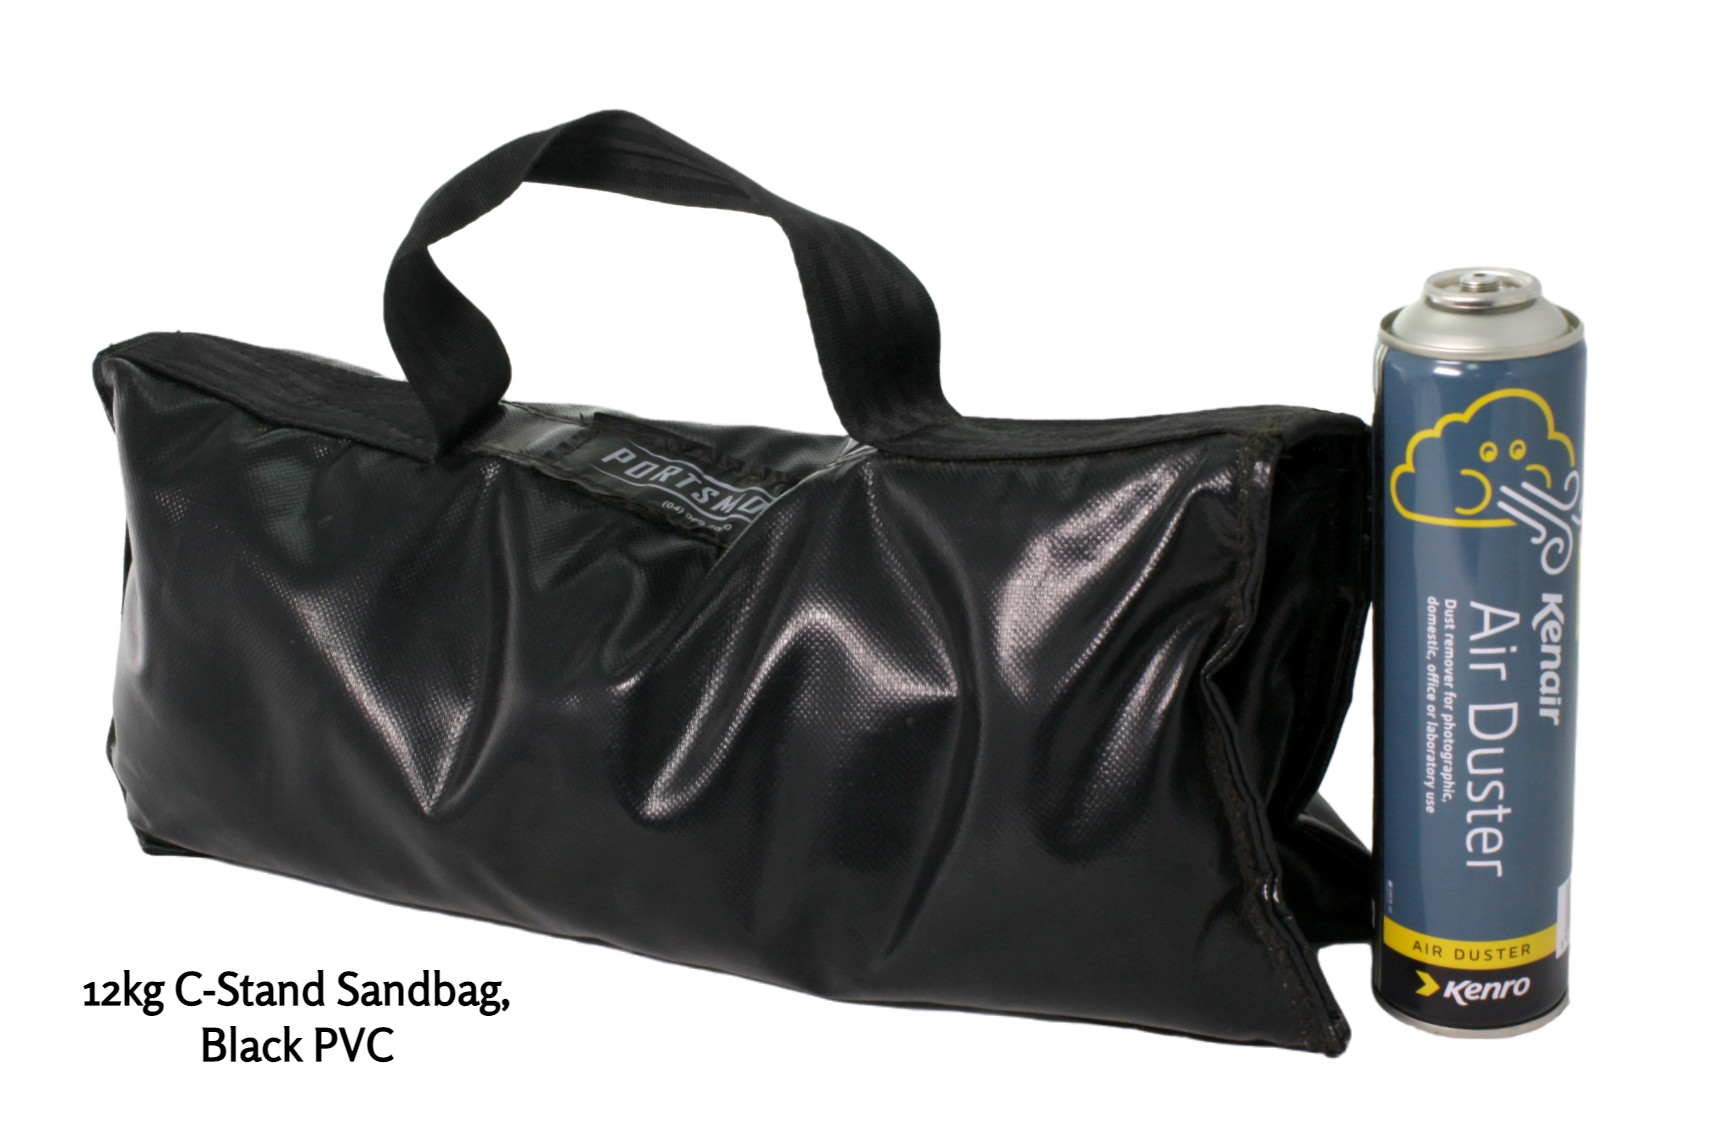 12kg C-stand sandbag in black gloss PVC, with a kenair can for scalewith a custom logo on the top. 